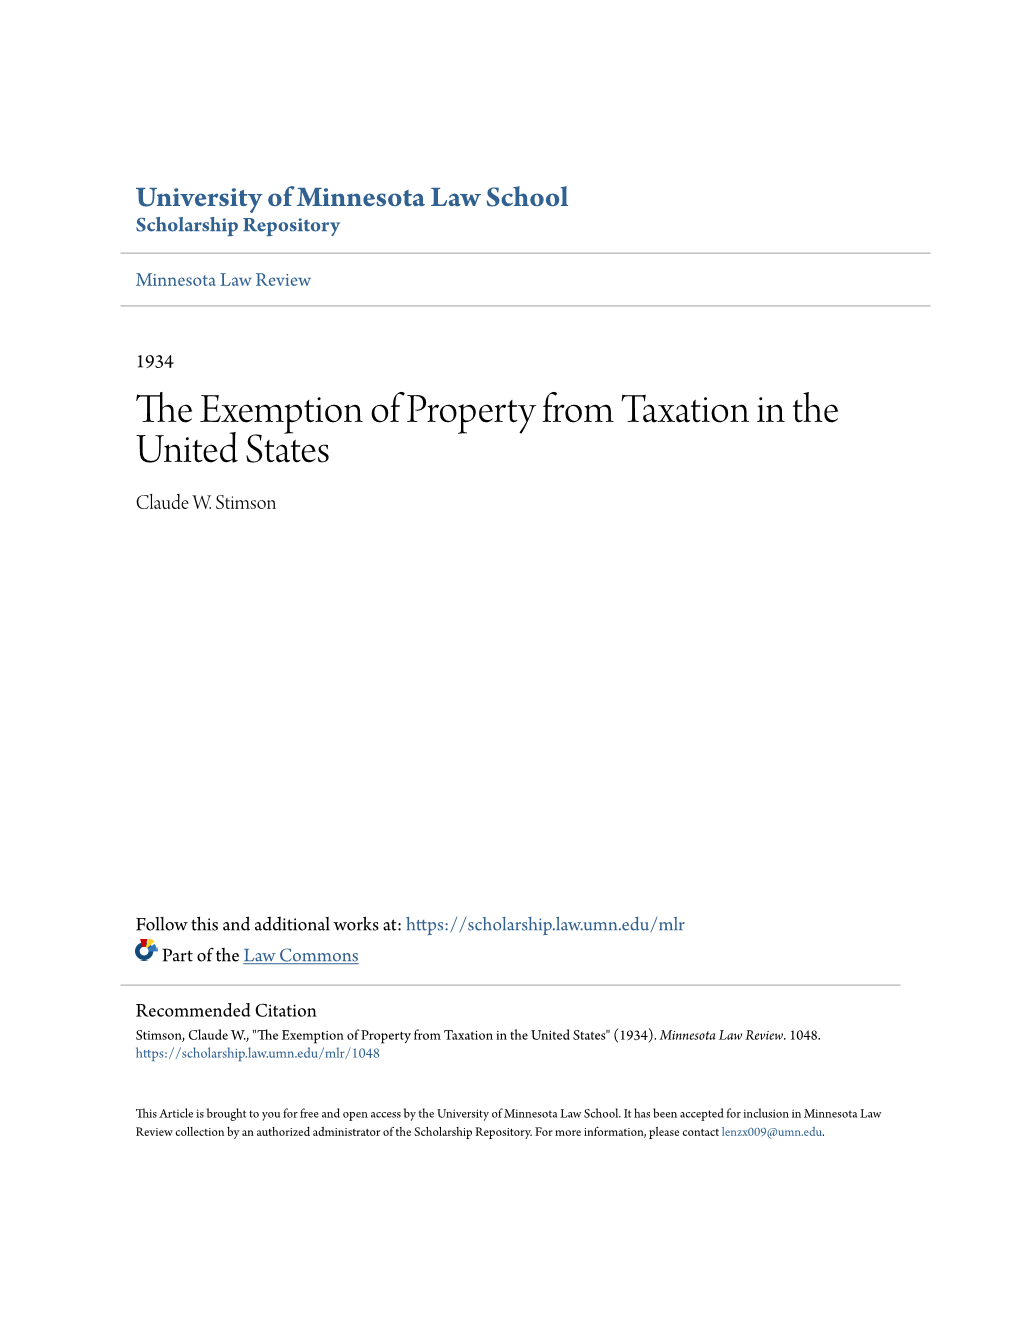 The Exemption of Property from Taxation in the United States Claude W